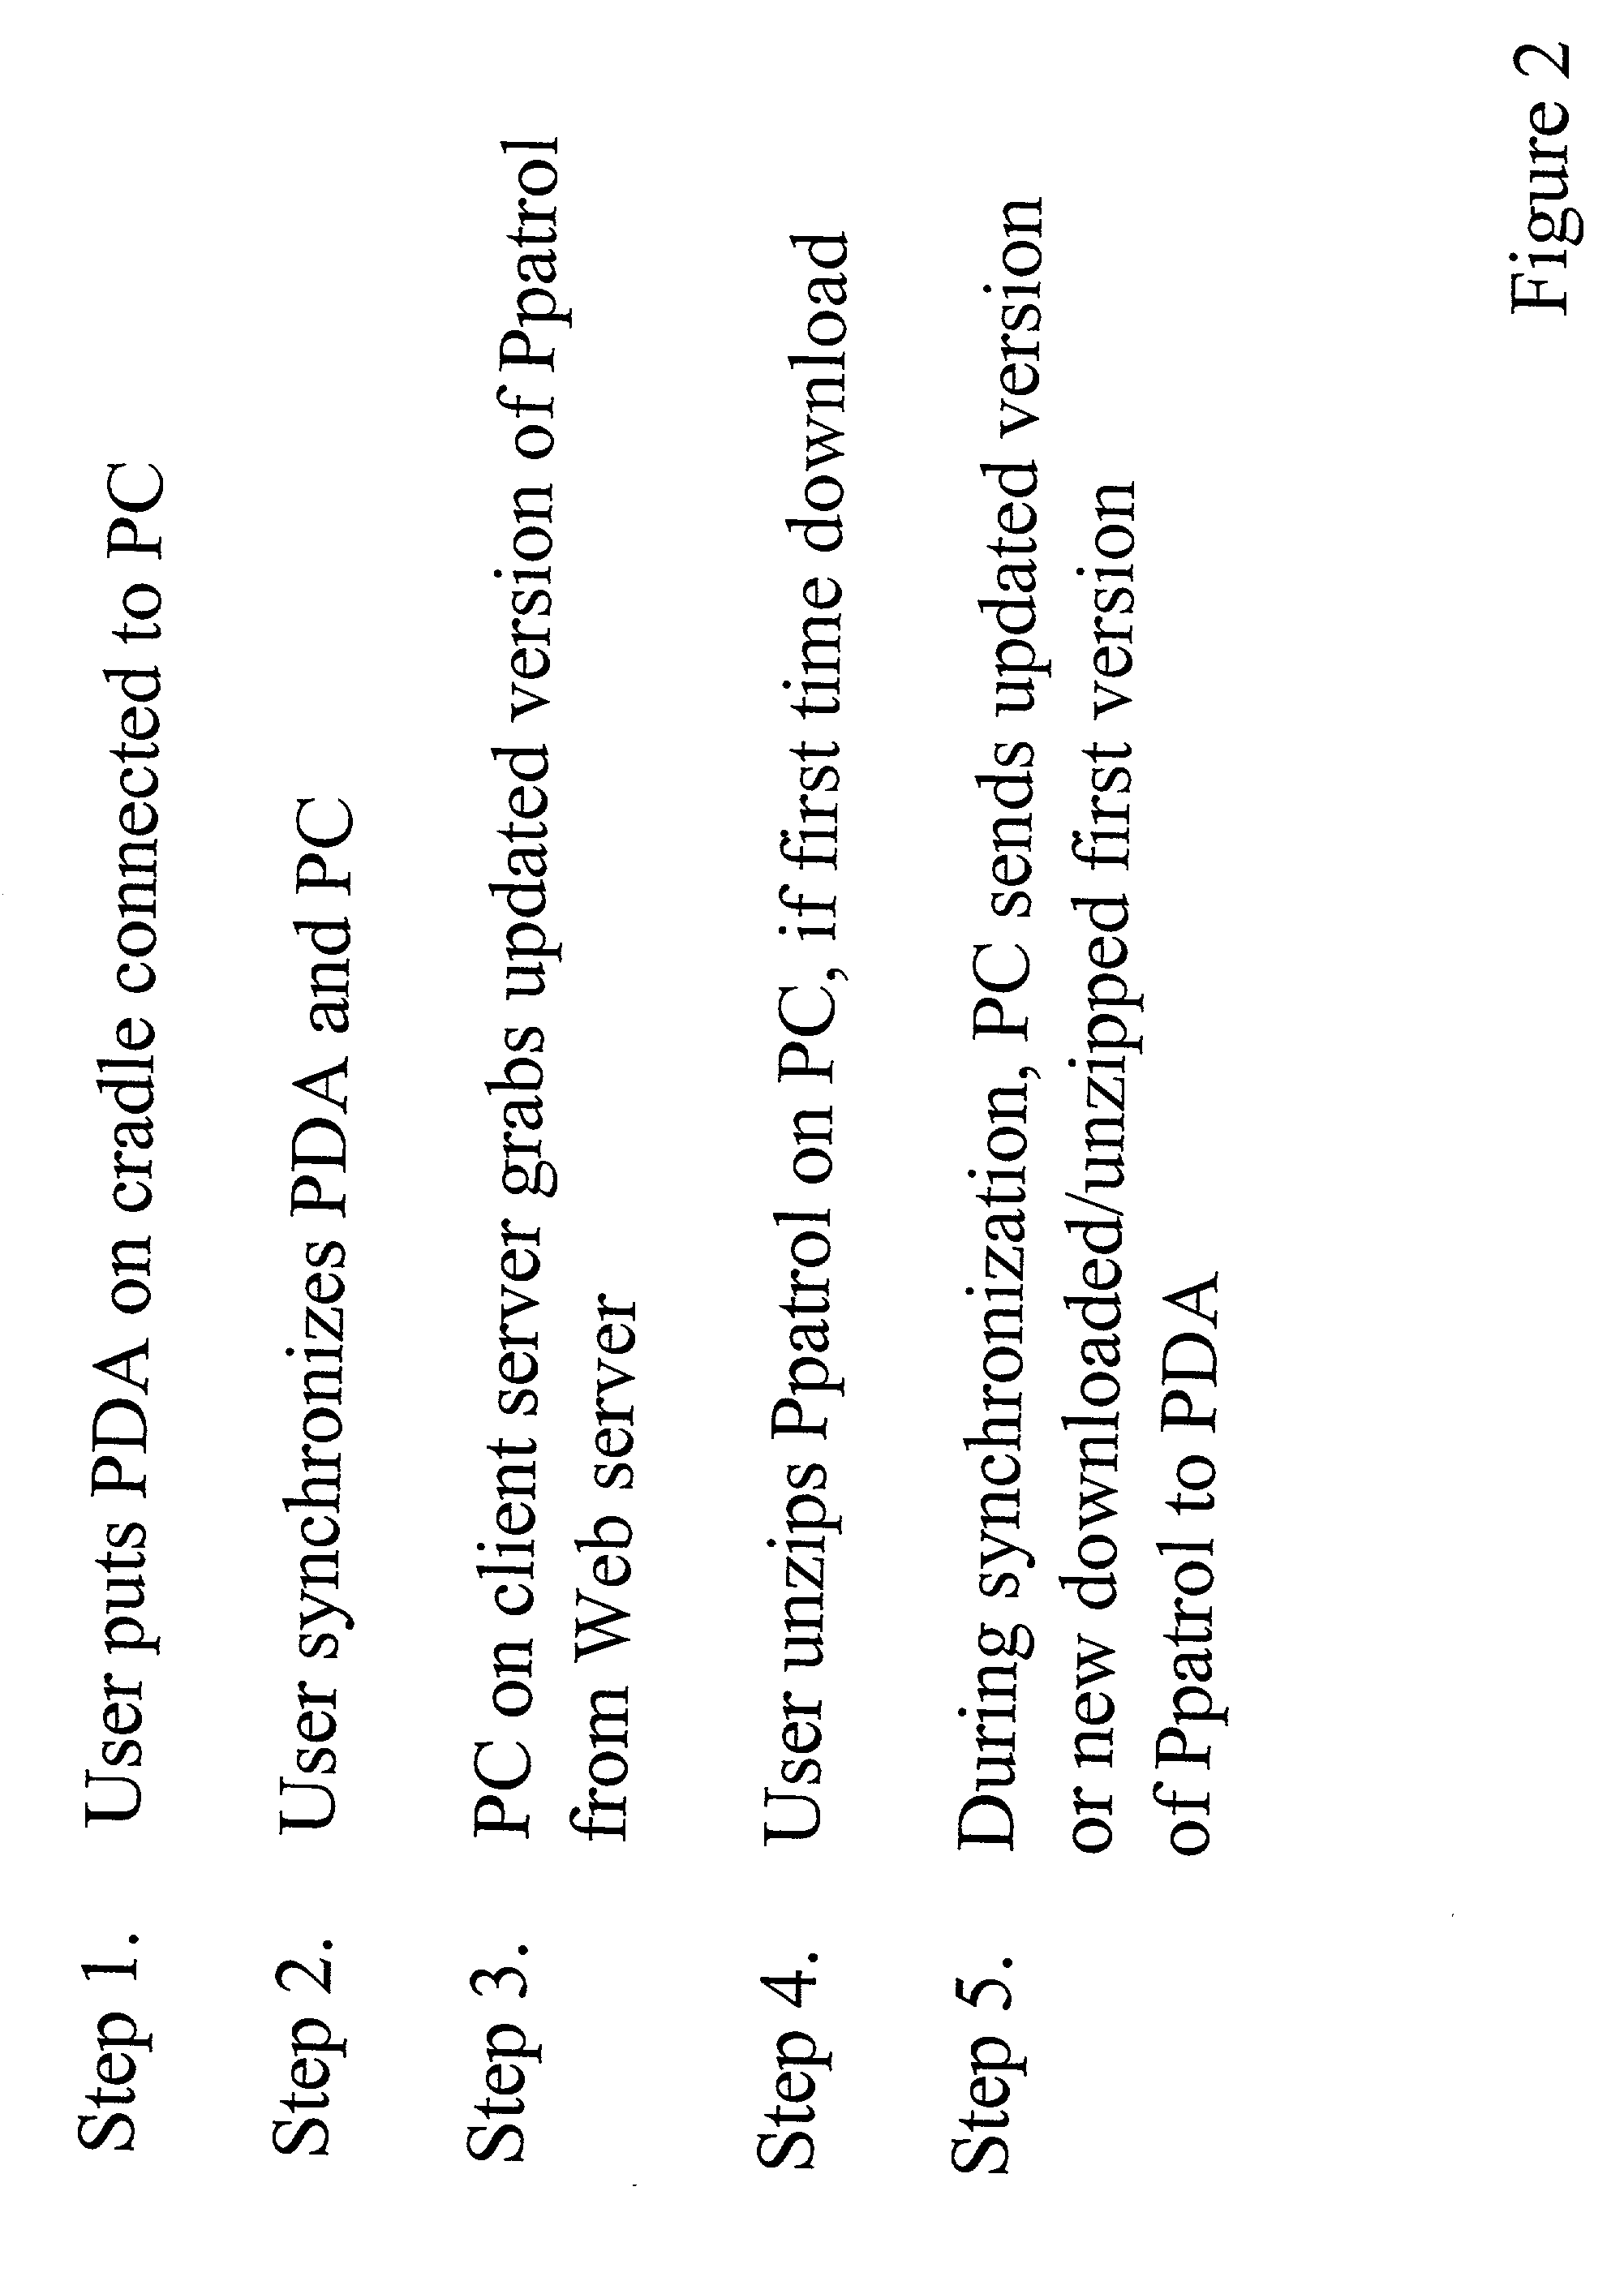 Method and system for electronic self-monitoring of menstrual cycles